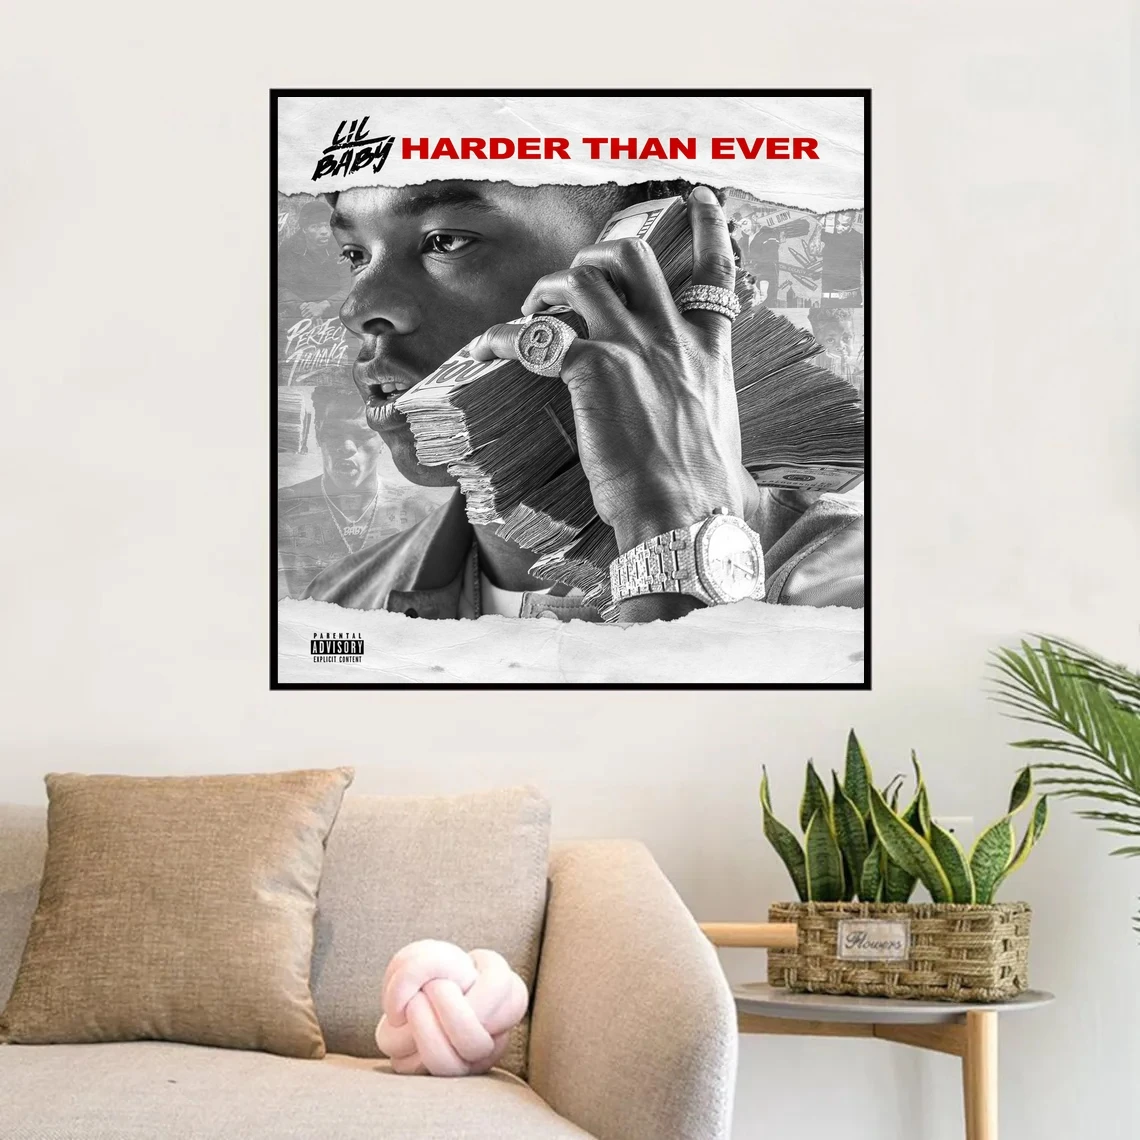 Details about   HD Print For Lil Baby Harder Than Ever Art Music Poster Wall Decor Painting 